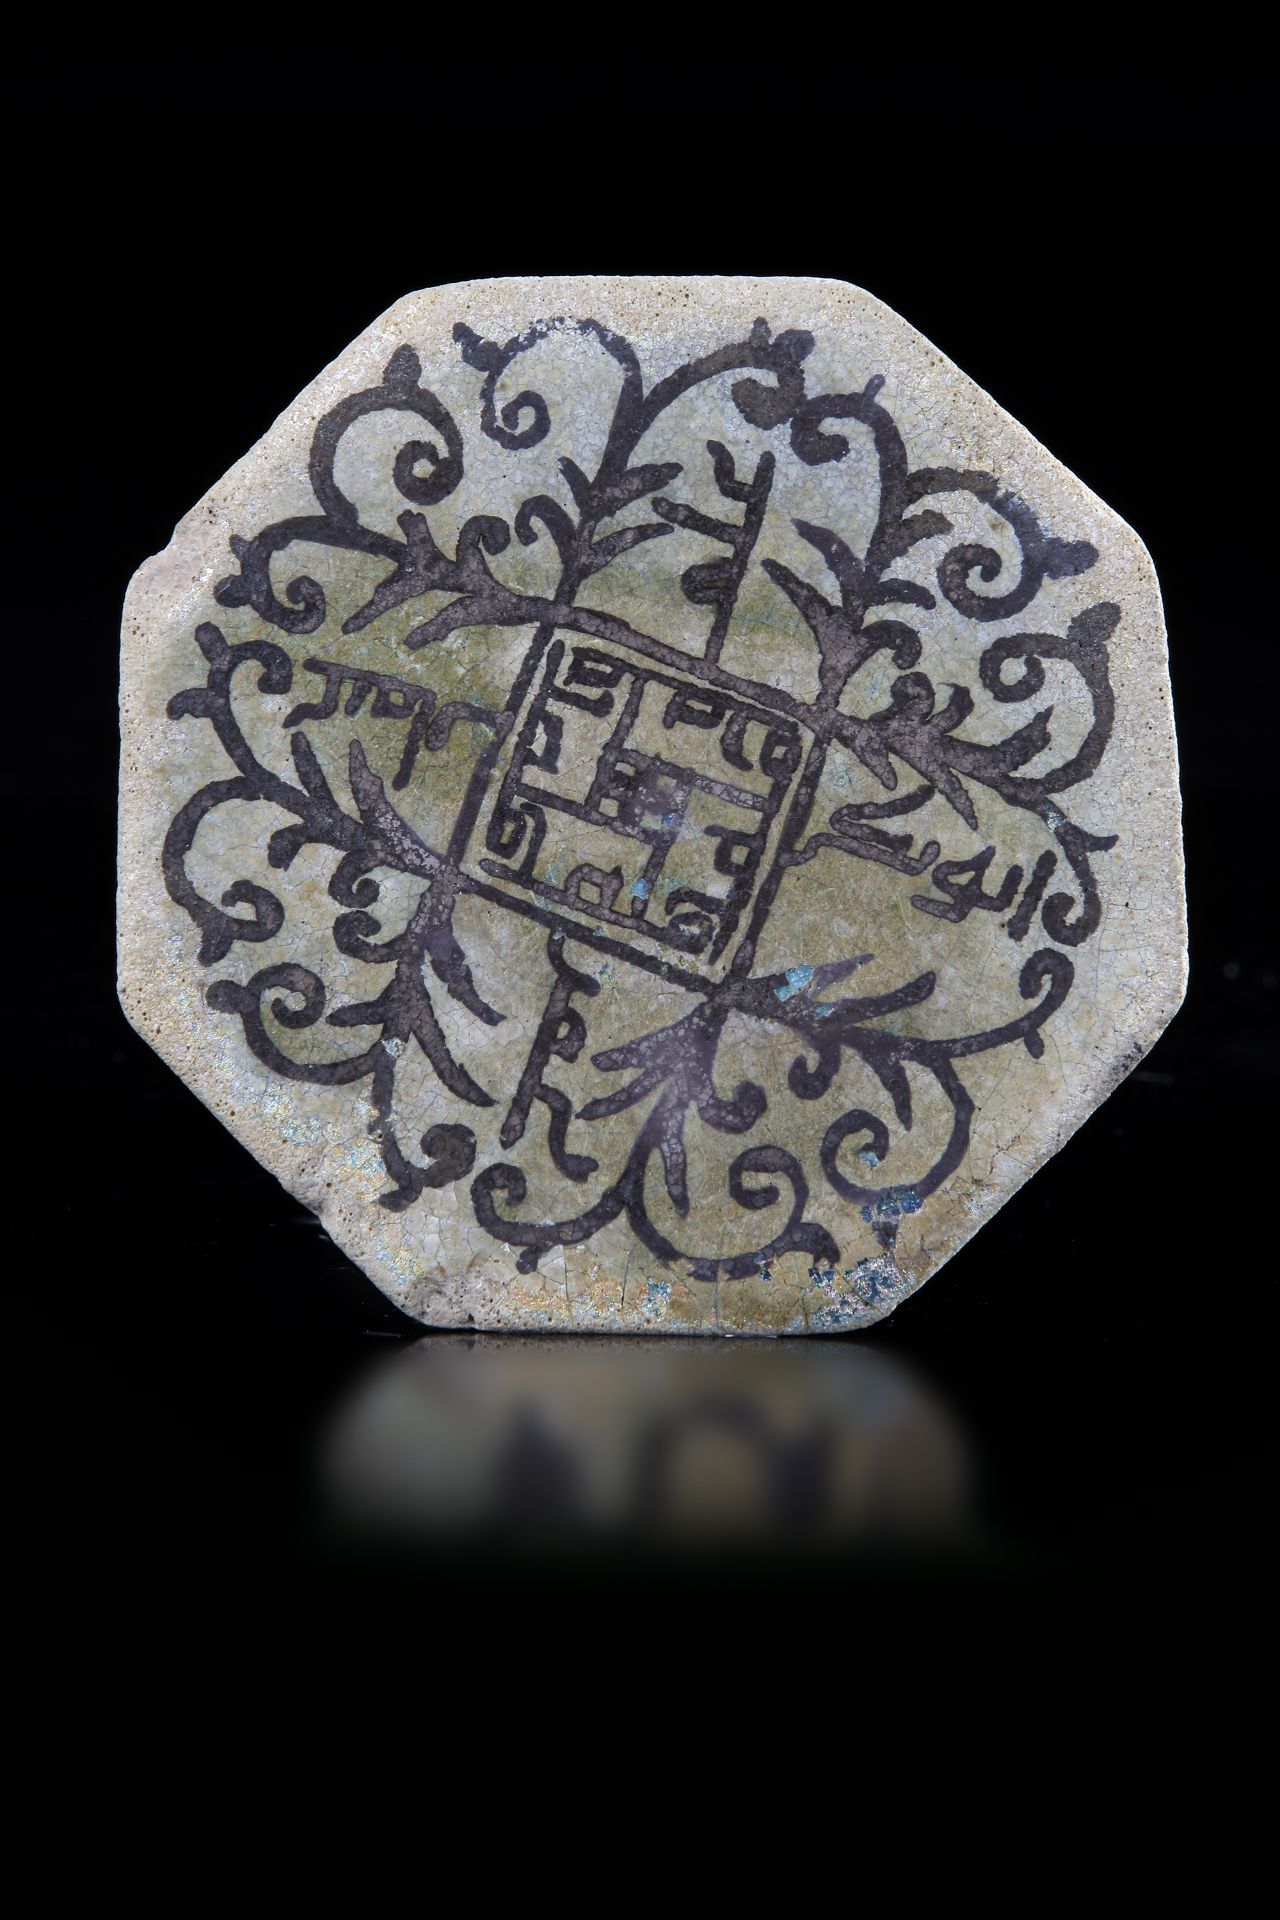 A LUSTRE PAINTED TURQUOISE GLAZED OCTAGONAL TILE, 11TH-12TH CENTURY